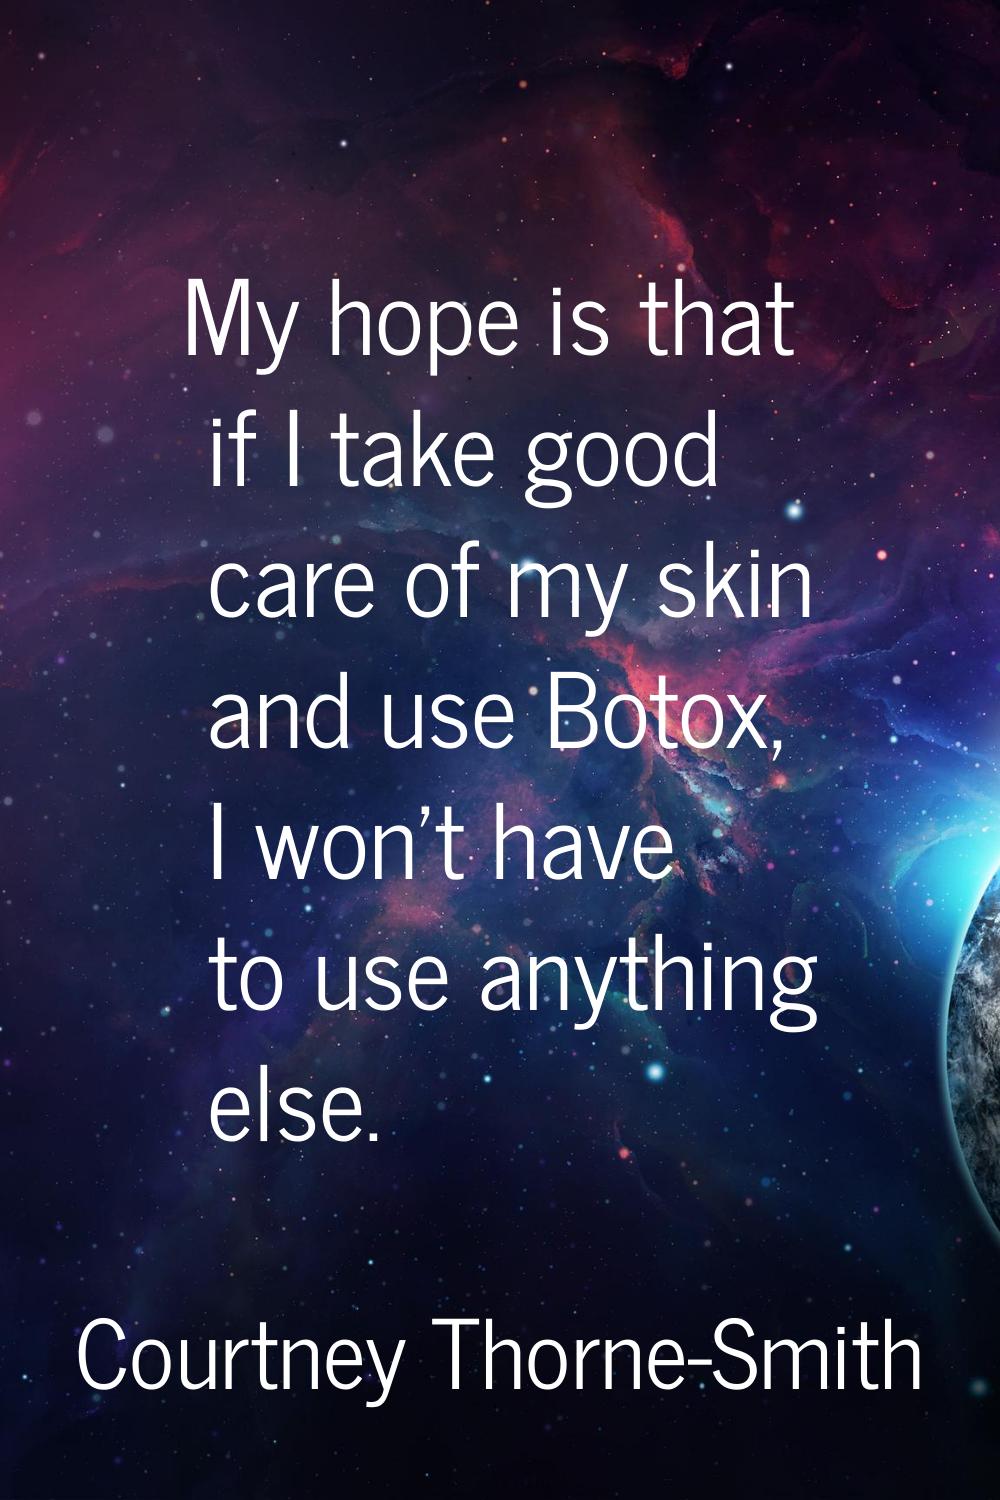 My hope is that if I take good care of my skin and use Botox, I won't have to use anything else.